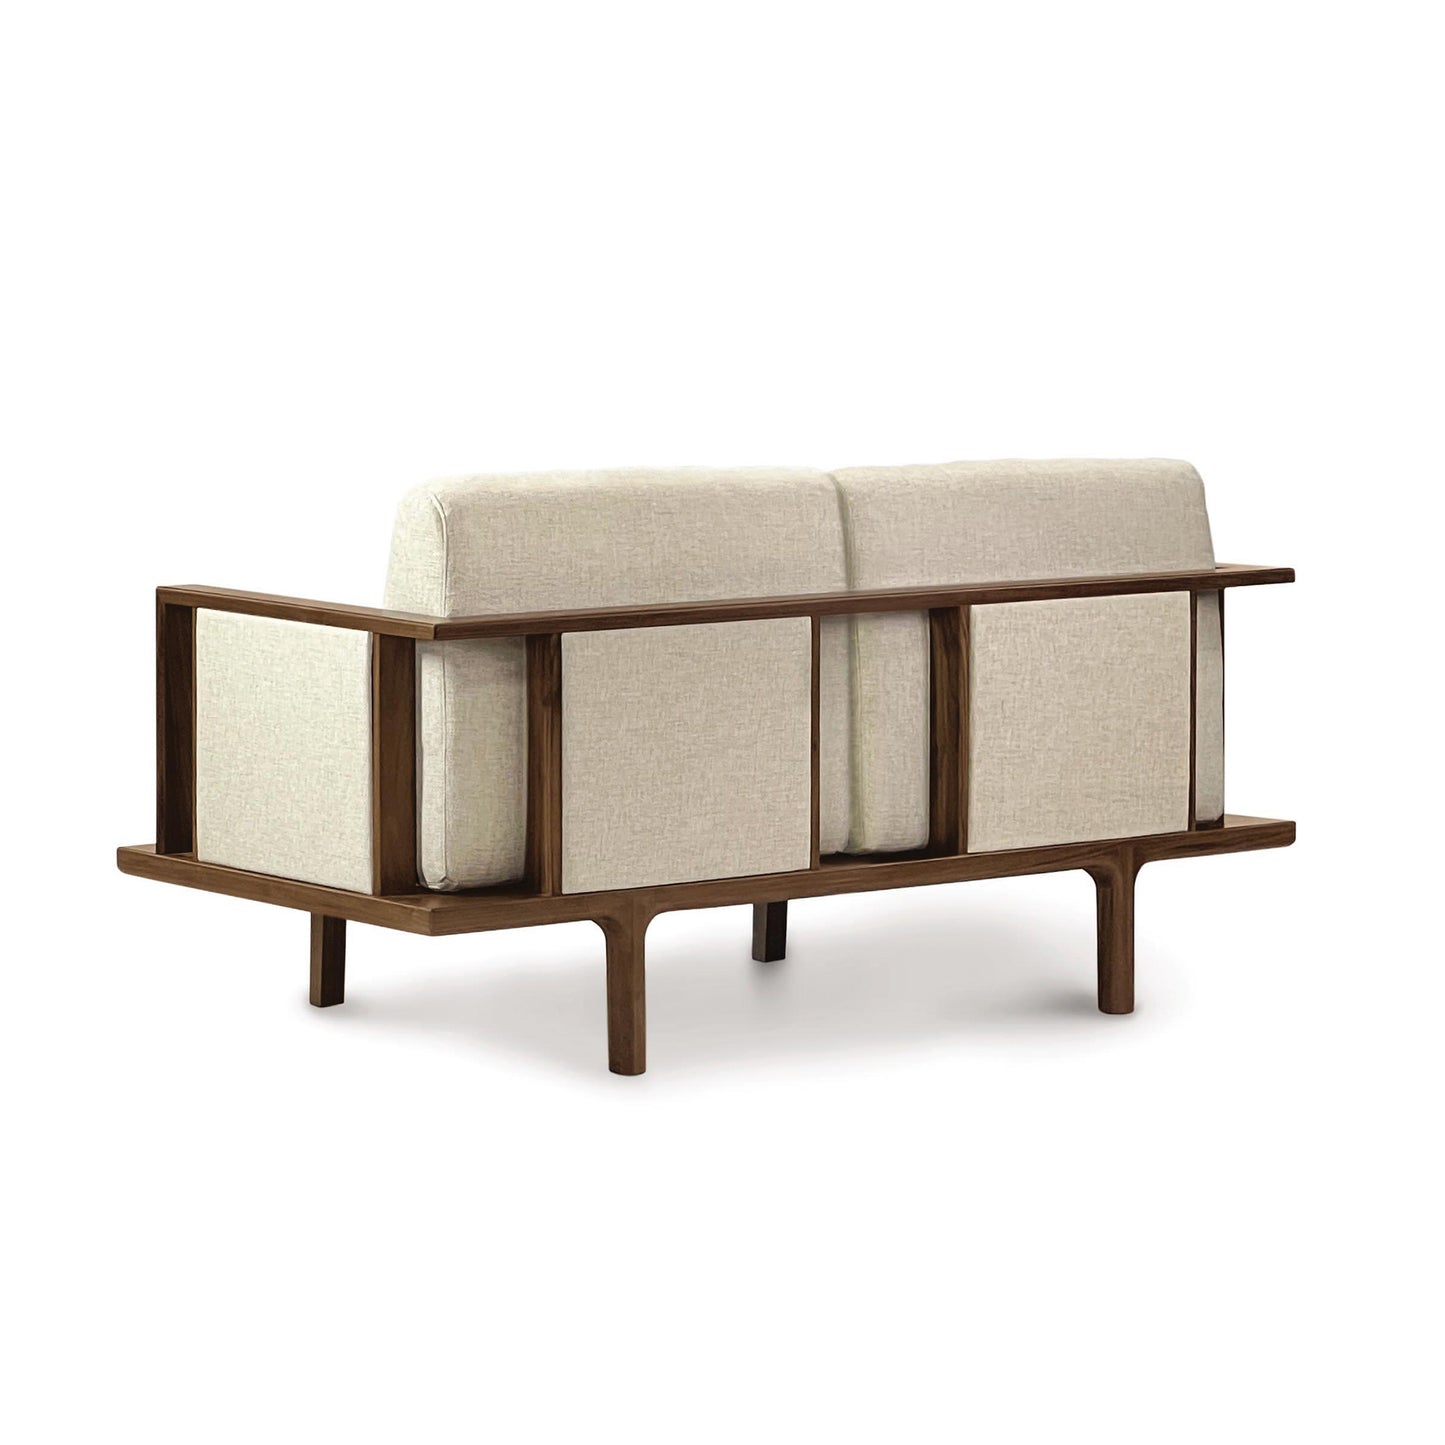 Mid-century modern style three-seater sofa with wooden frame and custom upholstery, like the Sierra Walnut Upholstered Loveseat with Upholstered Panels from Copeland Furniture.